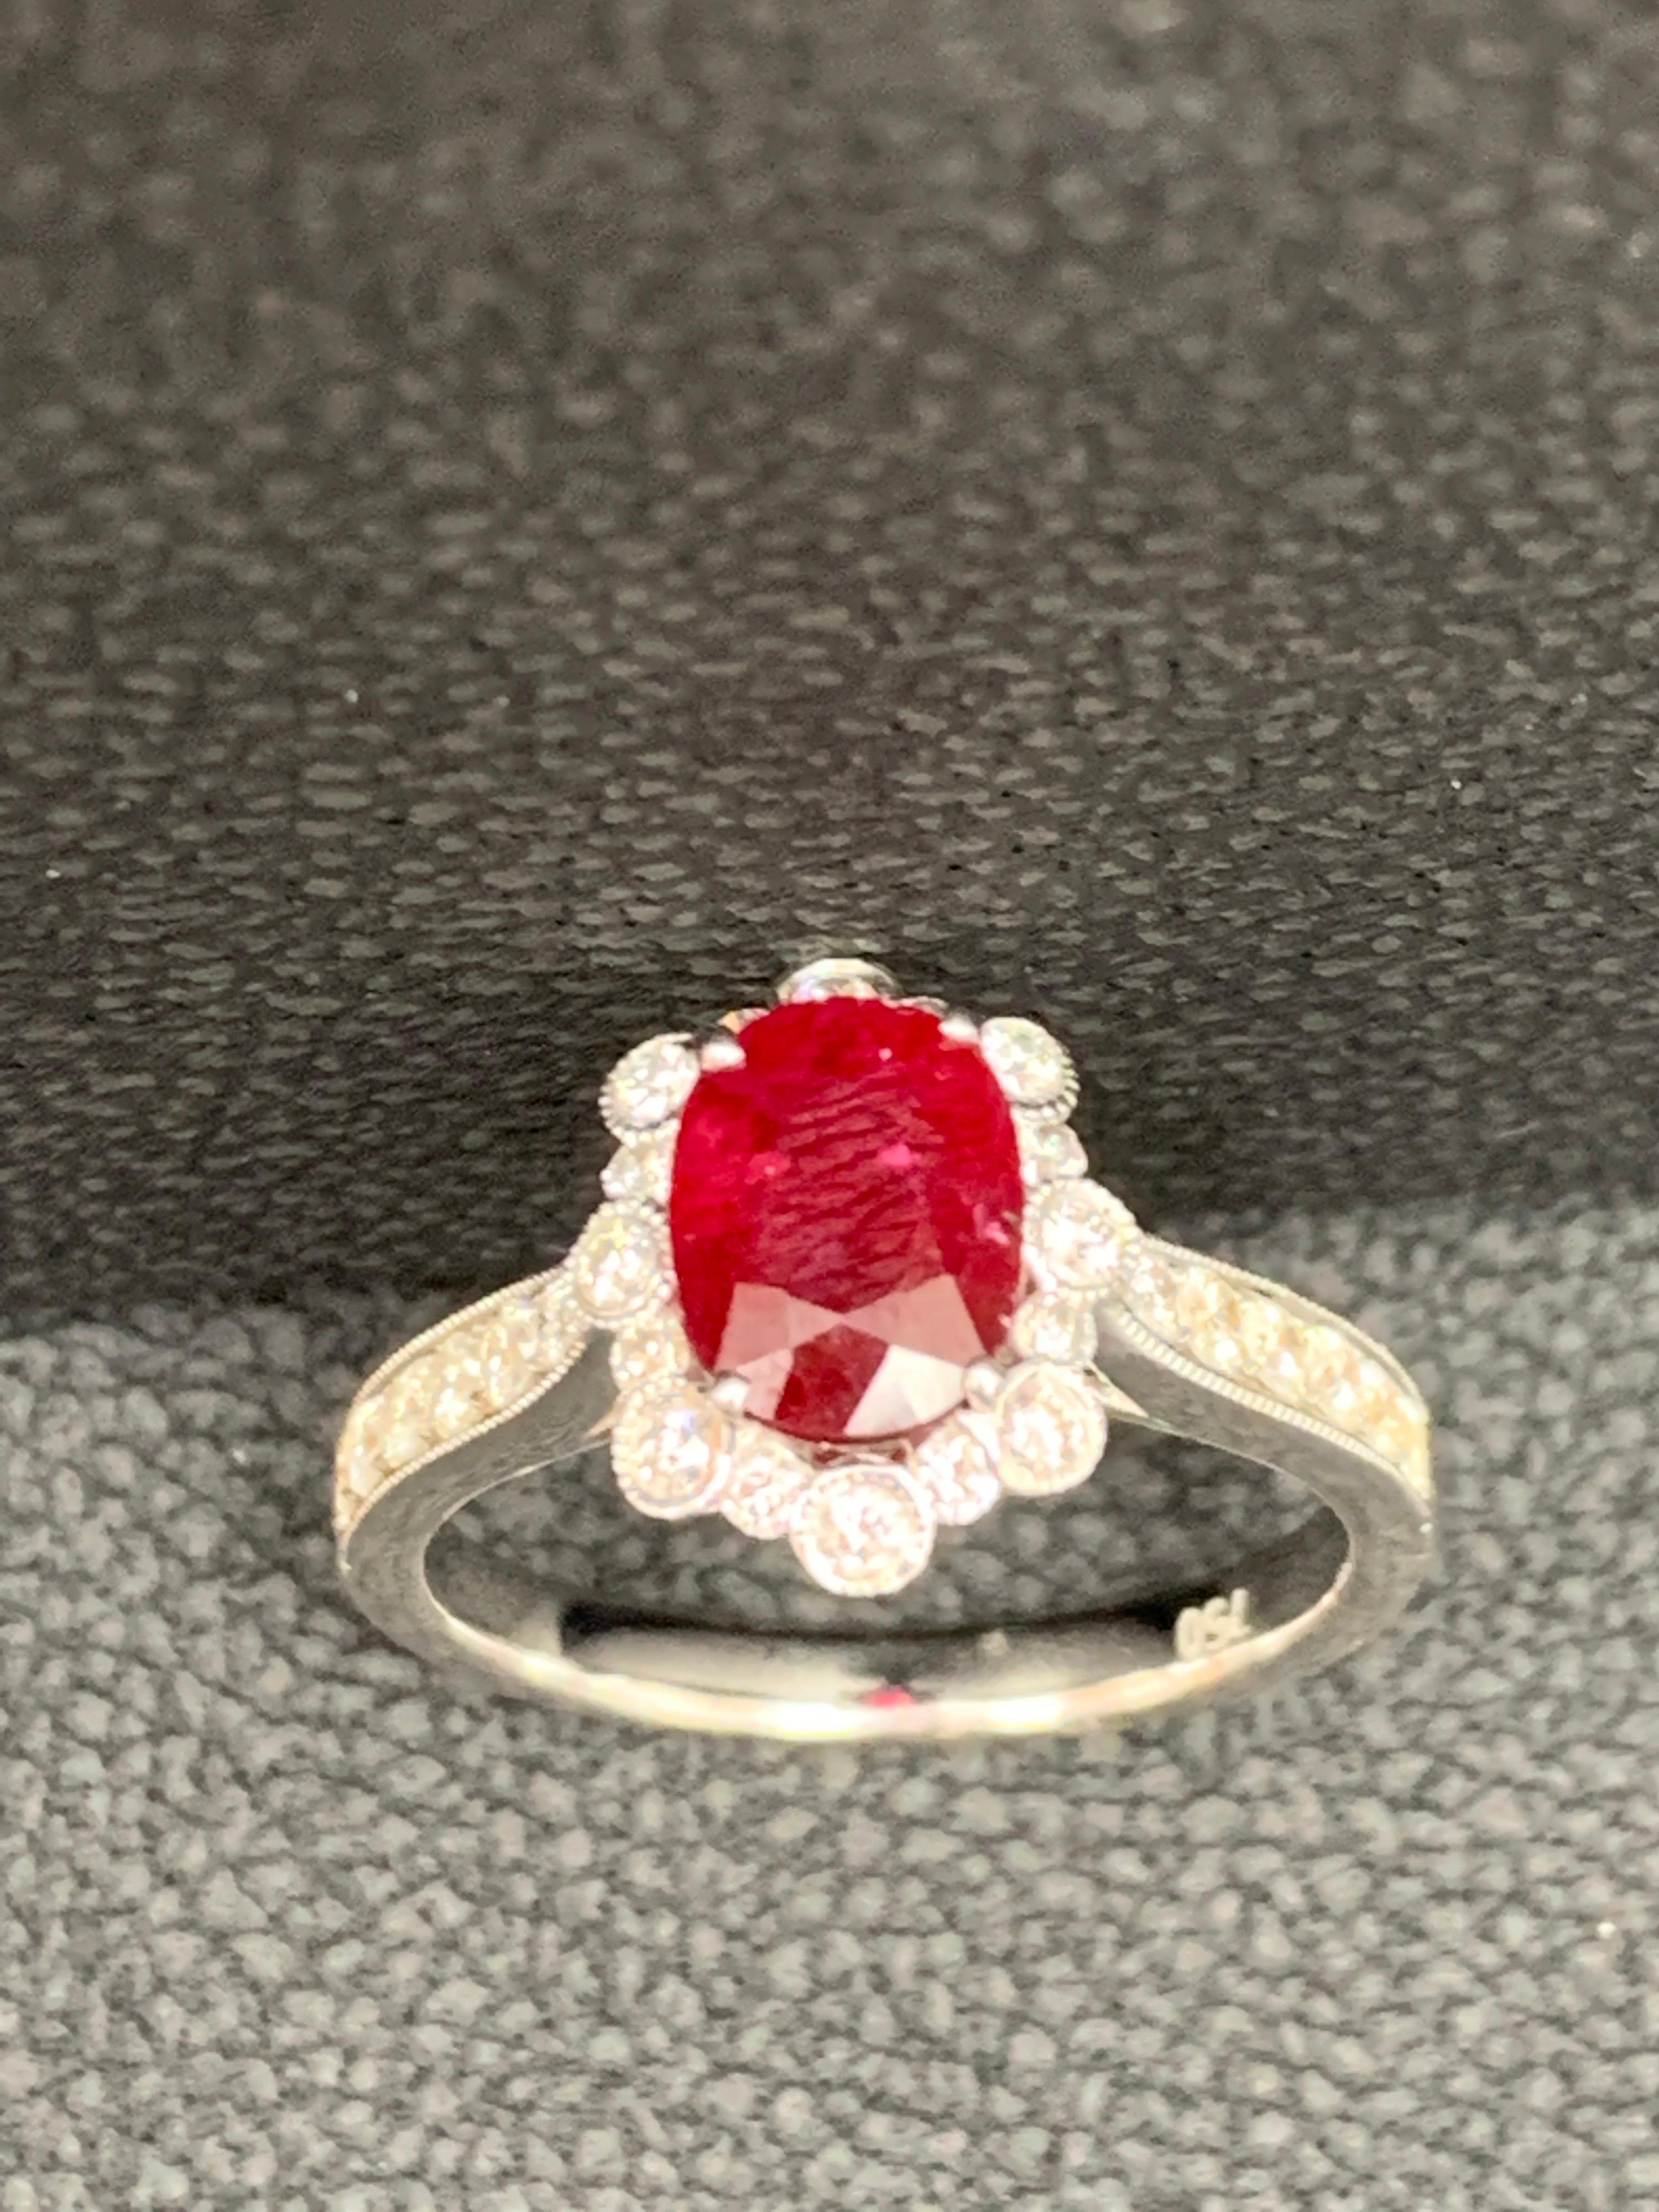 A vibrant and colorful engagement ring that features a 0.83 carat  oval cut ruby surrounded by Diamonds all over. The Ruby is set on a 4 prong white gold basket attached to a 18 karat white gold shank. Round cut brilliant diamonds weigh 0.44 carat